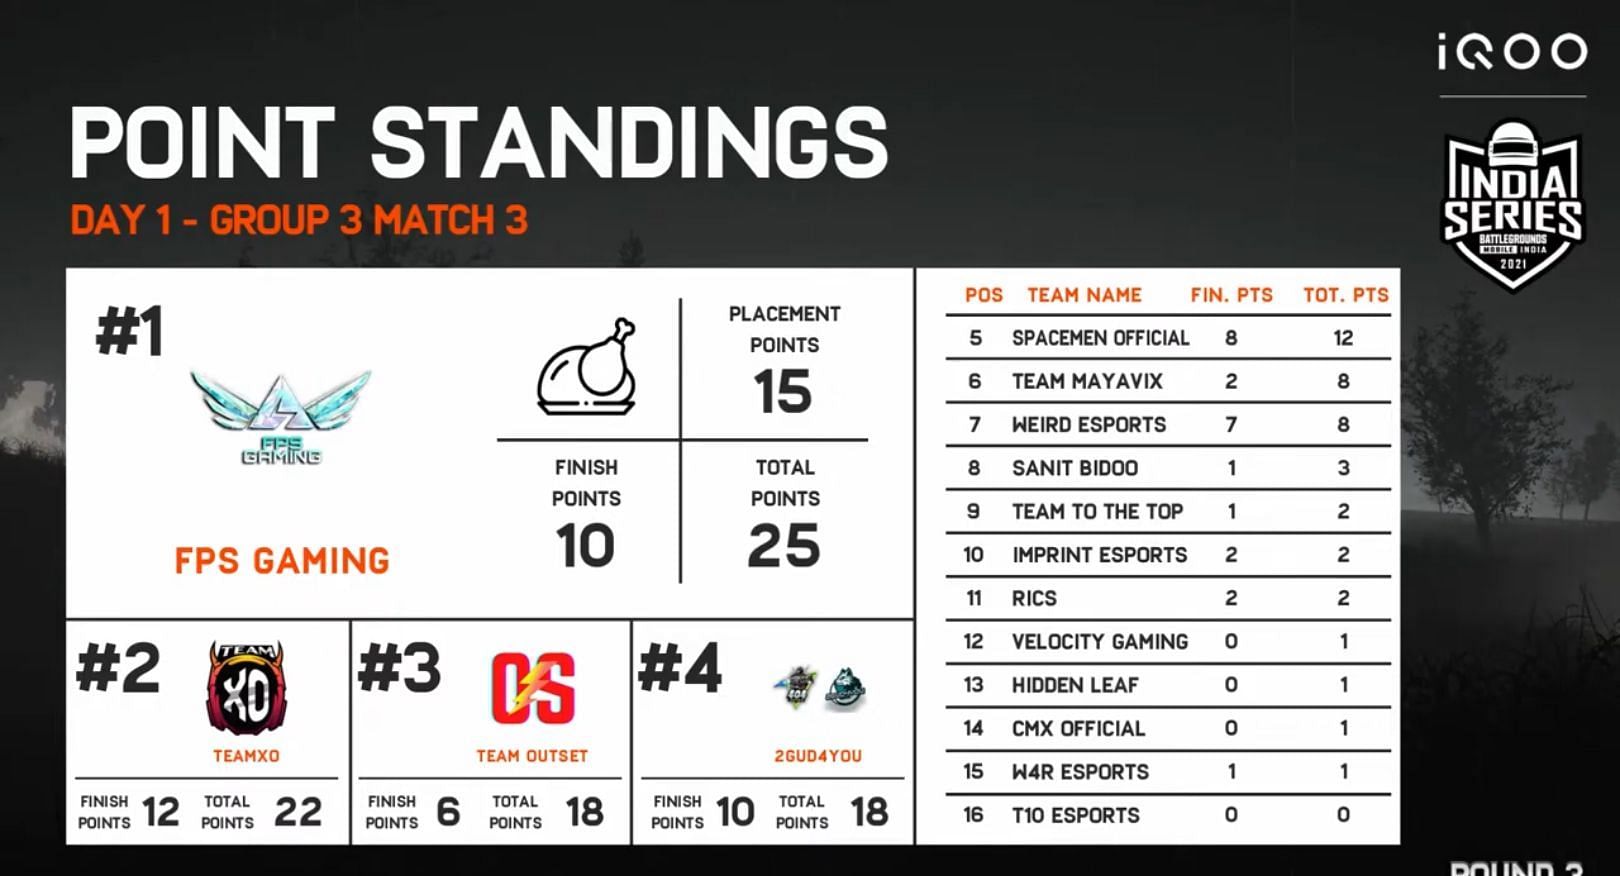 Velocity Gaming finished 12th place in the third match (Image via BGIS)